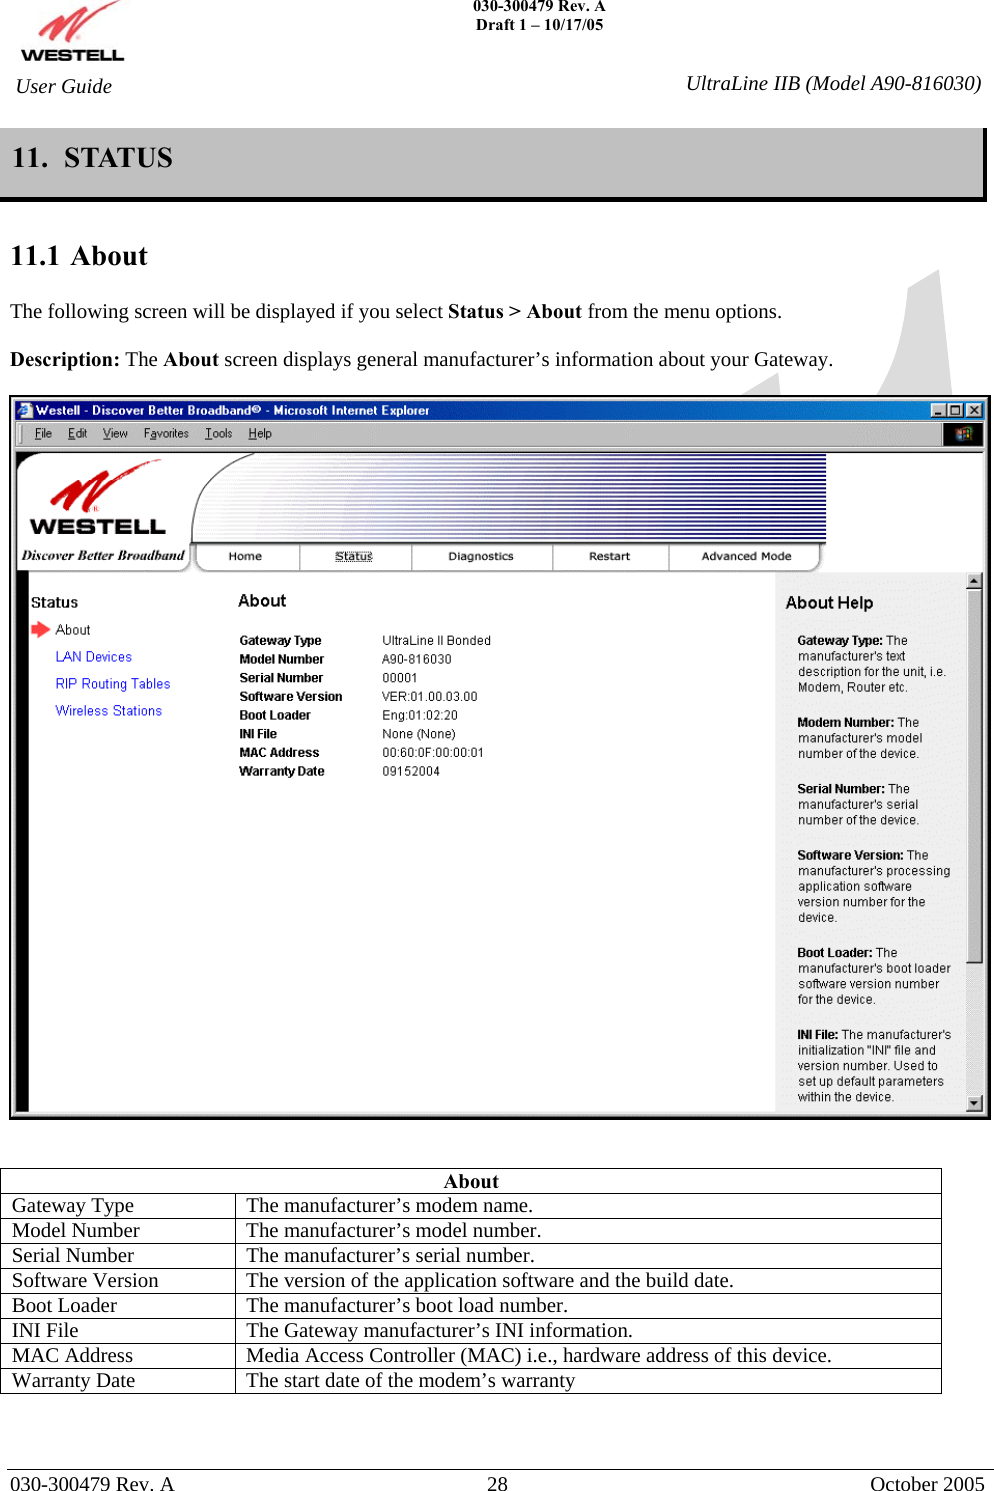    030-300479 Rev. A Draft 1 – 10/17/05   030-300479 Rev. A  28  October 2005  User Guide  UltraLine IIB (Model A90-816030)11.  STATUS   11.1 About  The following screen will be displayed if you select Status &gt; About from the menu options.   Description: The About screen displays general manufacturer’s information about your Gateway.     About Gateway Type  The manufacturer’s modem name. Model Number  The manufacturer’s model number. Serial Number  The manufacturer’s serial number. Software Version  The version of the application software and the build date. Boot Loader  The manufacturer’s boot load number. INI File  The Gateway manufacturer’s INI information. MAC Address  Media Access Controller (MAC) i.e., hardware address of this device. Warranty Date  The start date of the modem’s warranty    